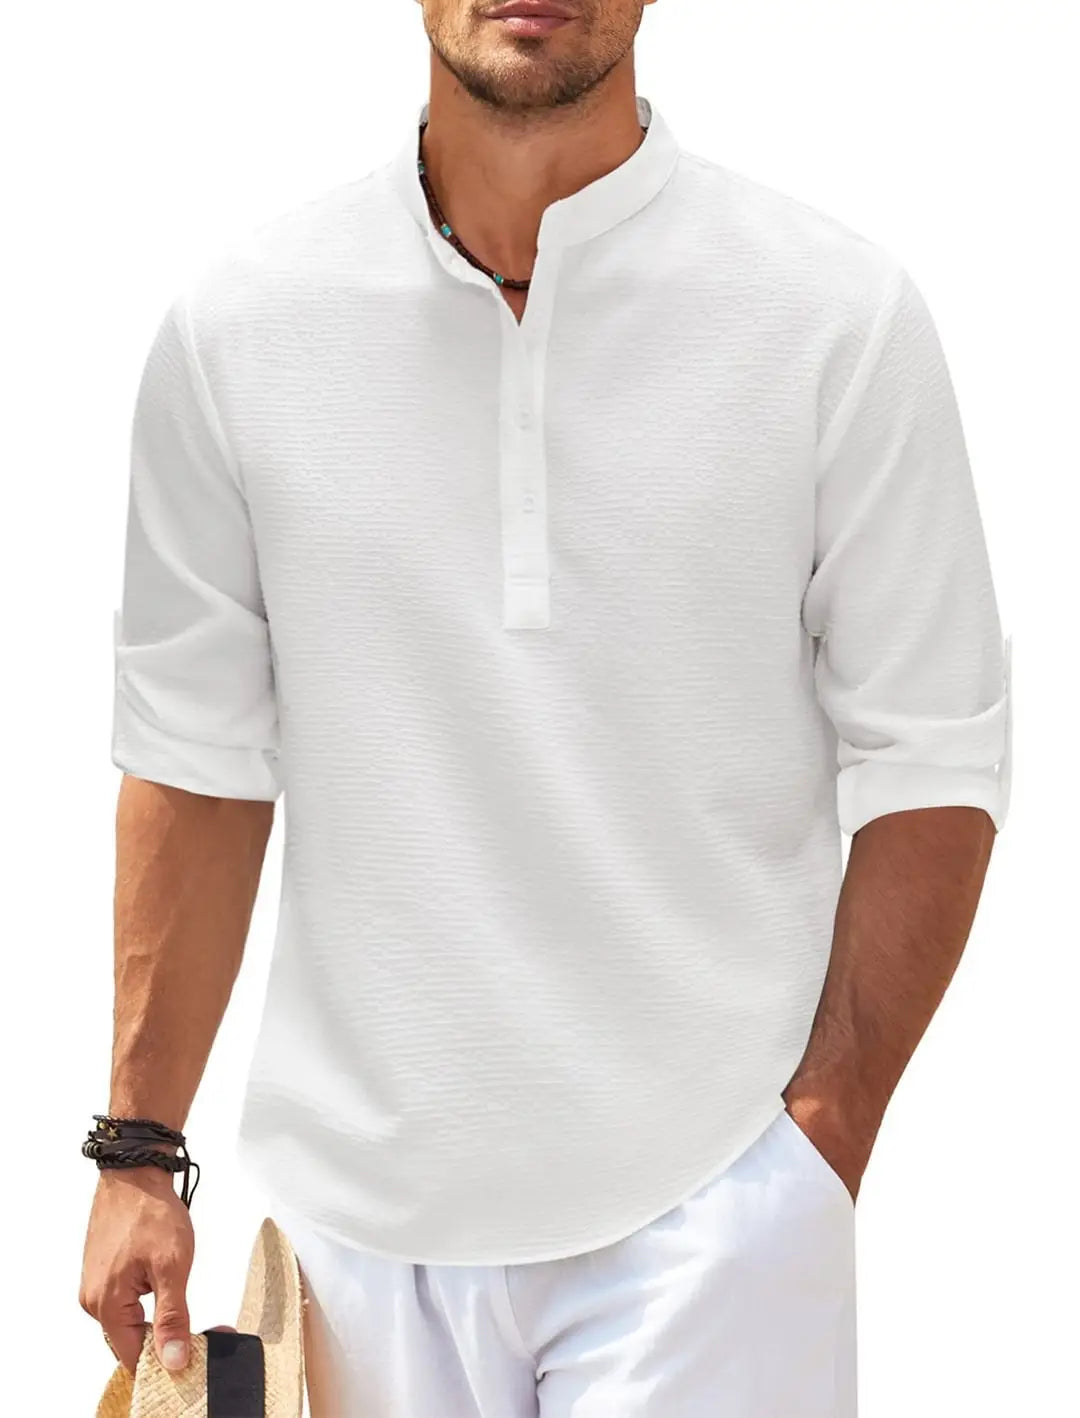 Men?€?s Casual Shirt Long Sleeve Stand Collar Solid Color Mens Clothing